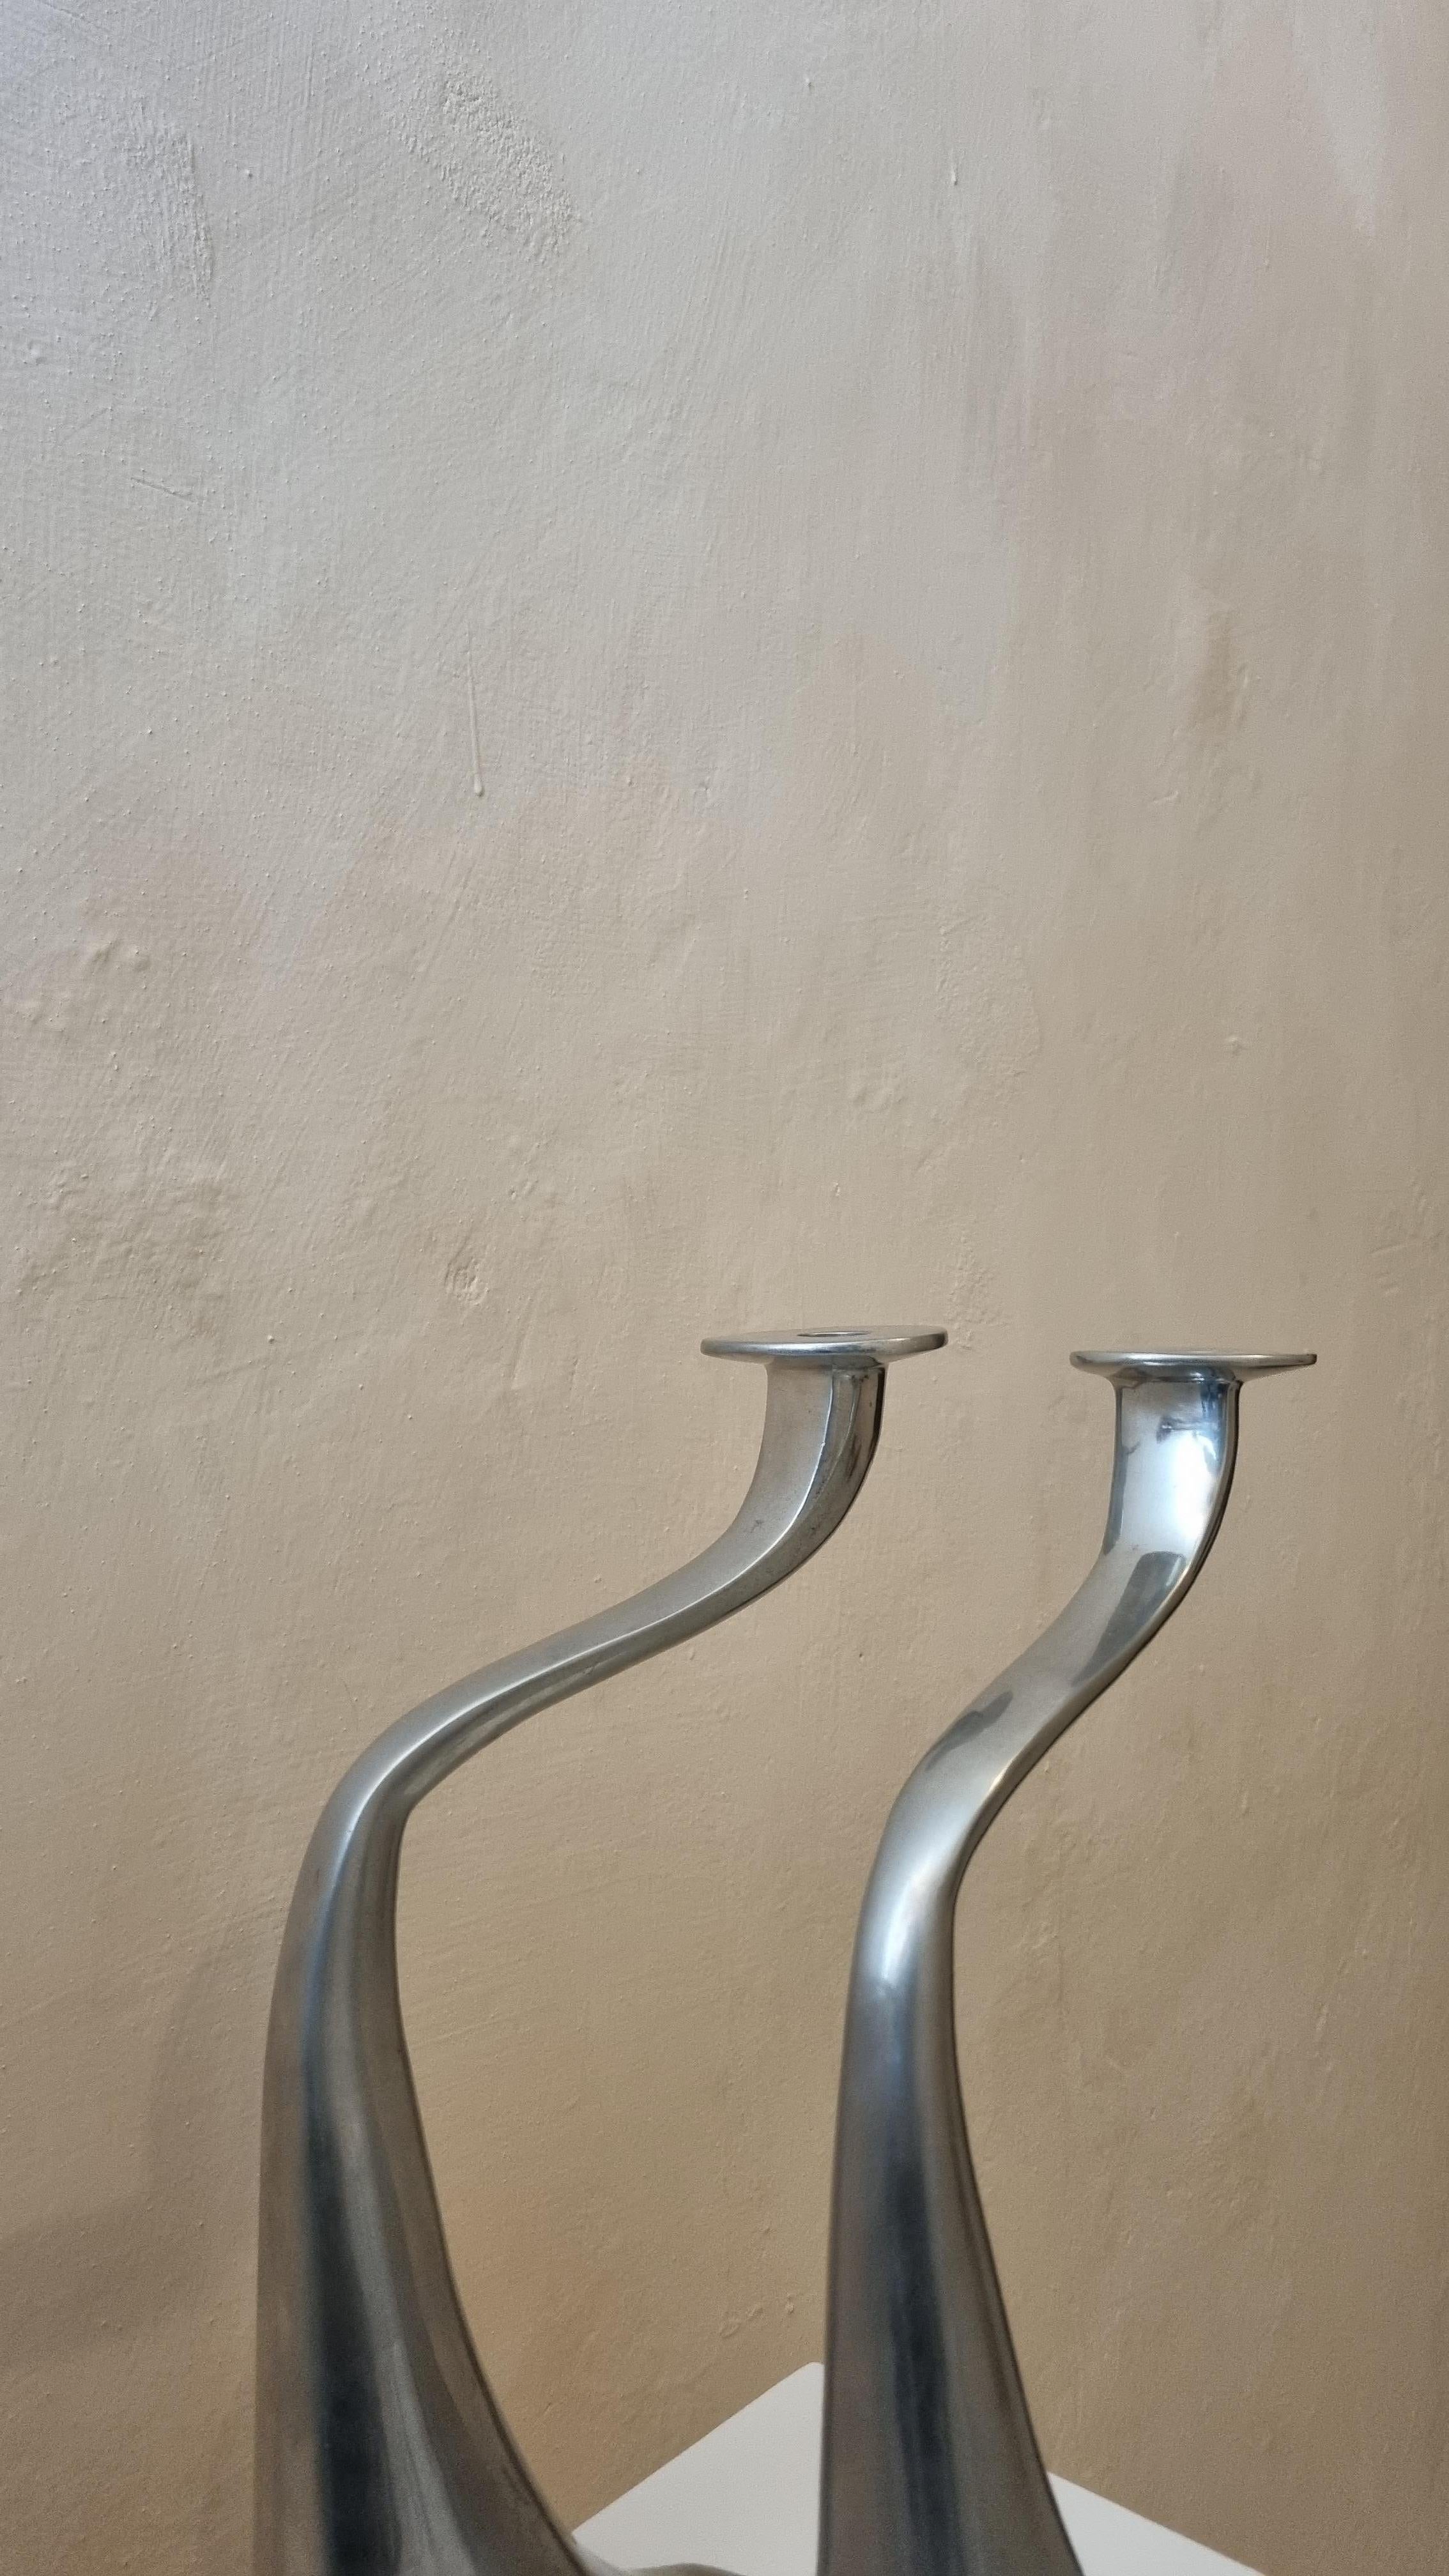 Italian Pair of aluminum candlesticks mod. Turner by Xavier Lust produced by Driade, 90s